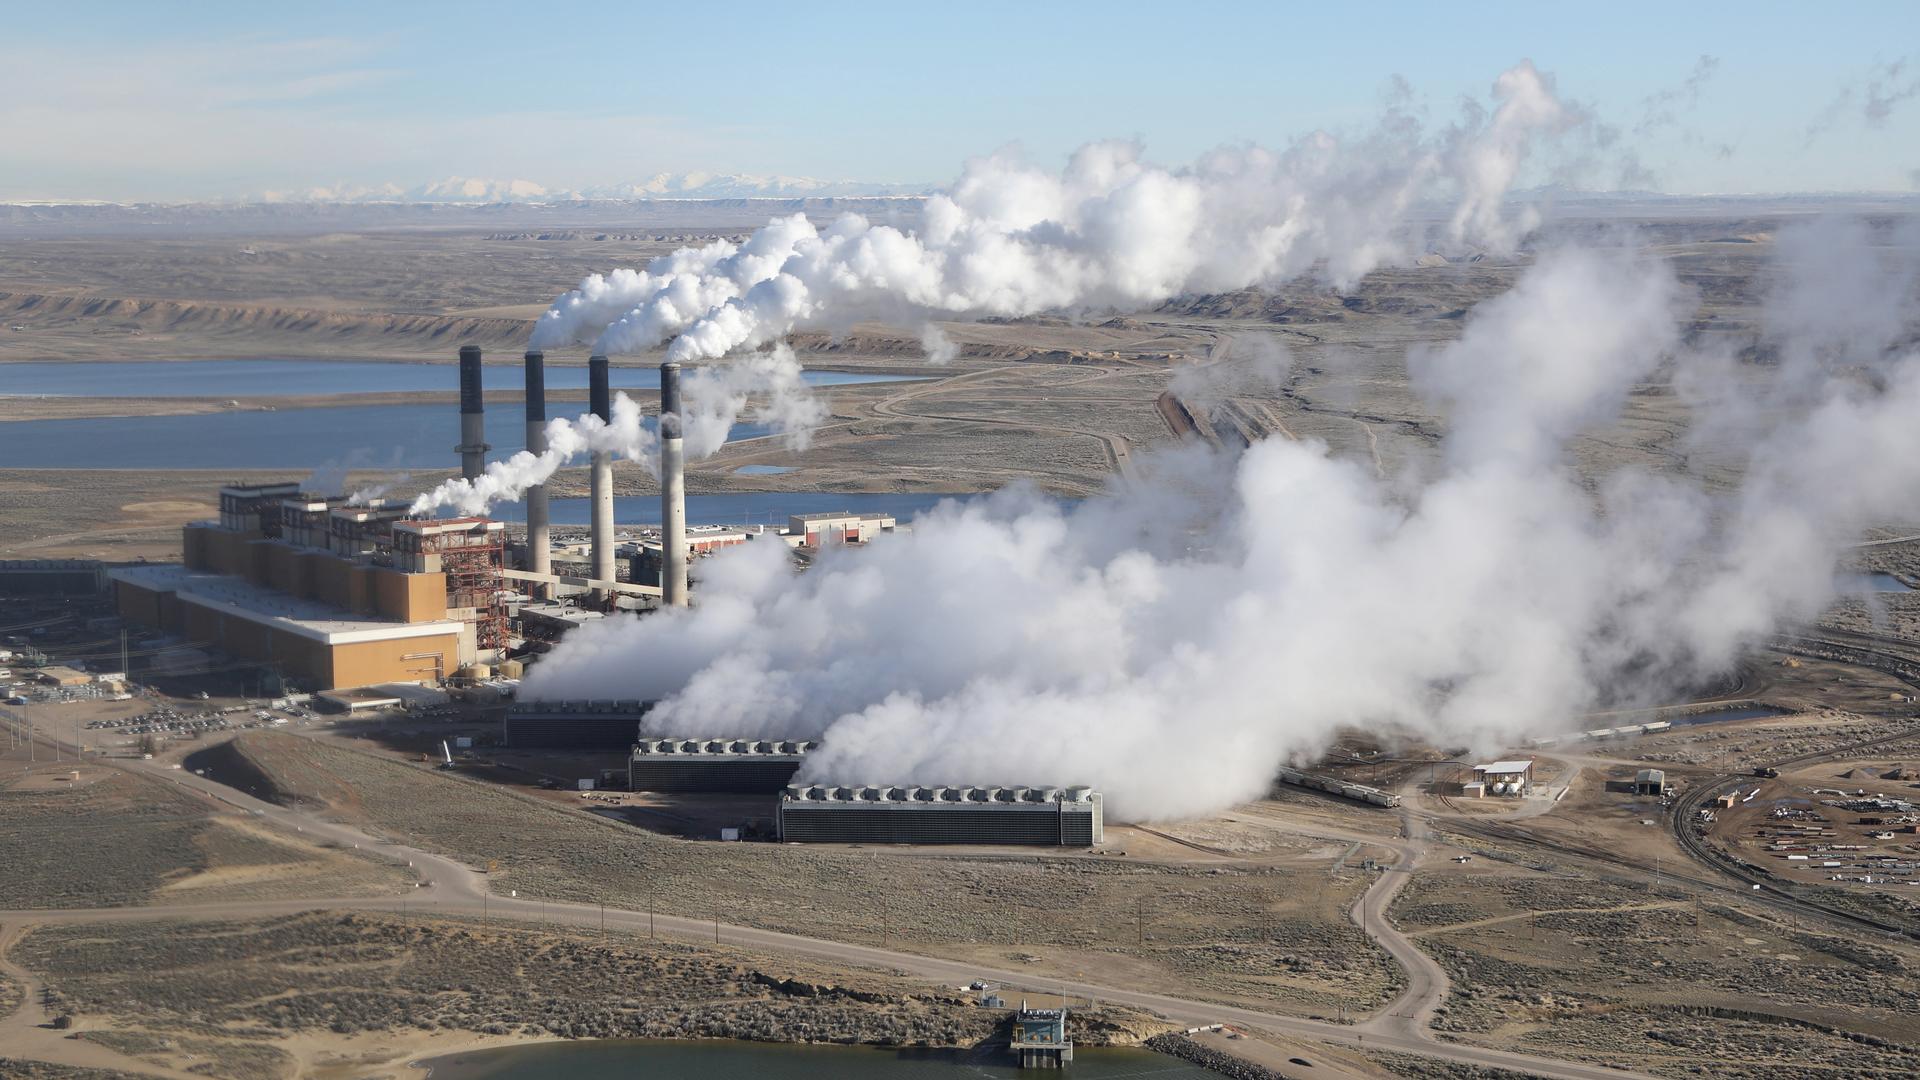 Coal-fired power plants like this one in Wyoming are among the largest sources of climate-altering pollution in the US, and had been targets of Obama administration rules to significantly cut US emissions under the Paris Climate agreement. President Trump